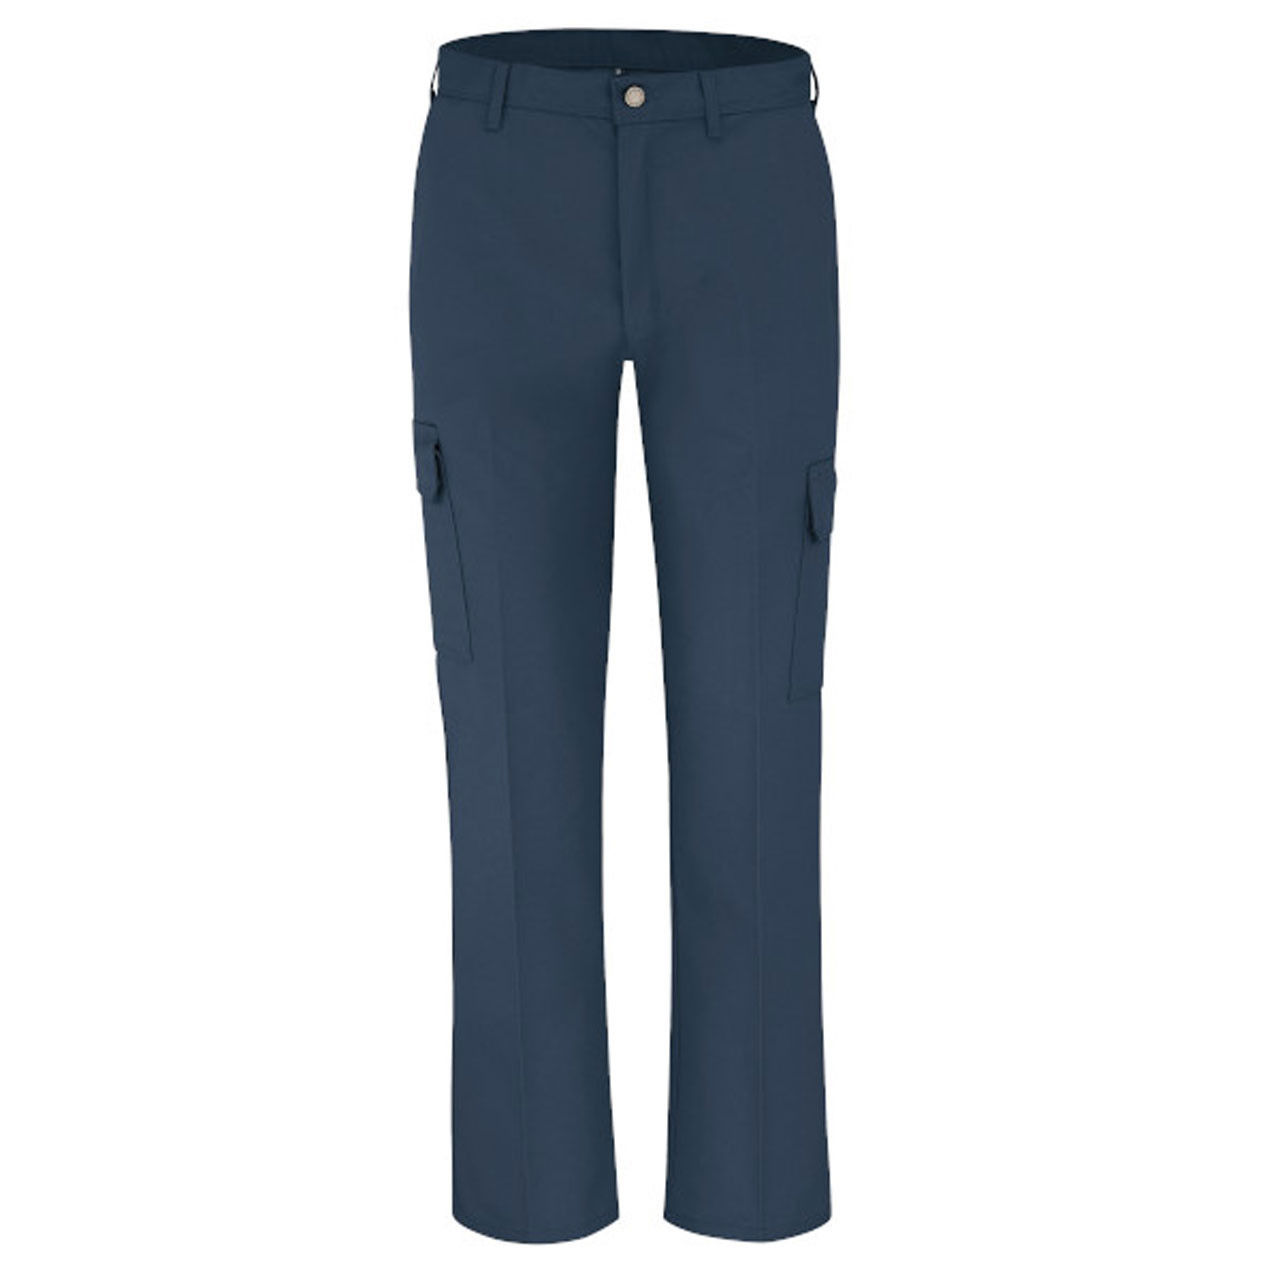 Is the fabric of the Dickies® Men's industrial cargo pants durable?